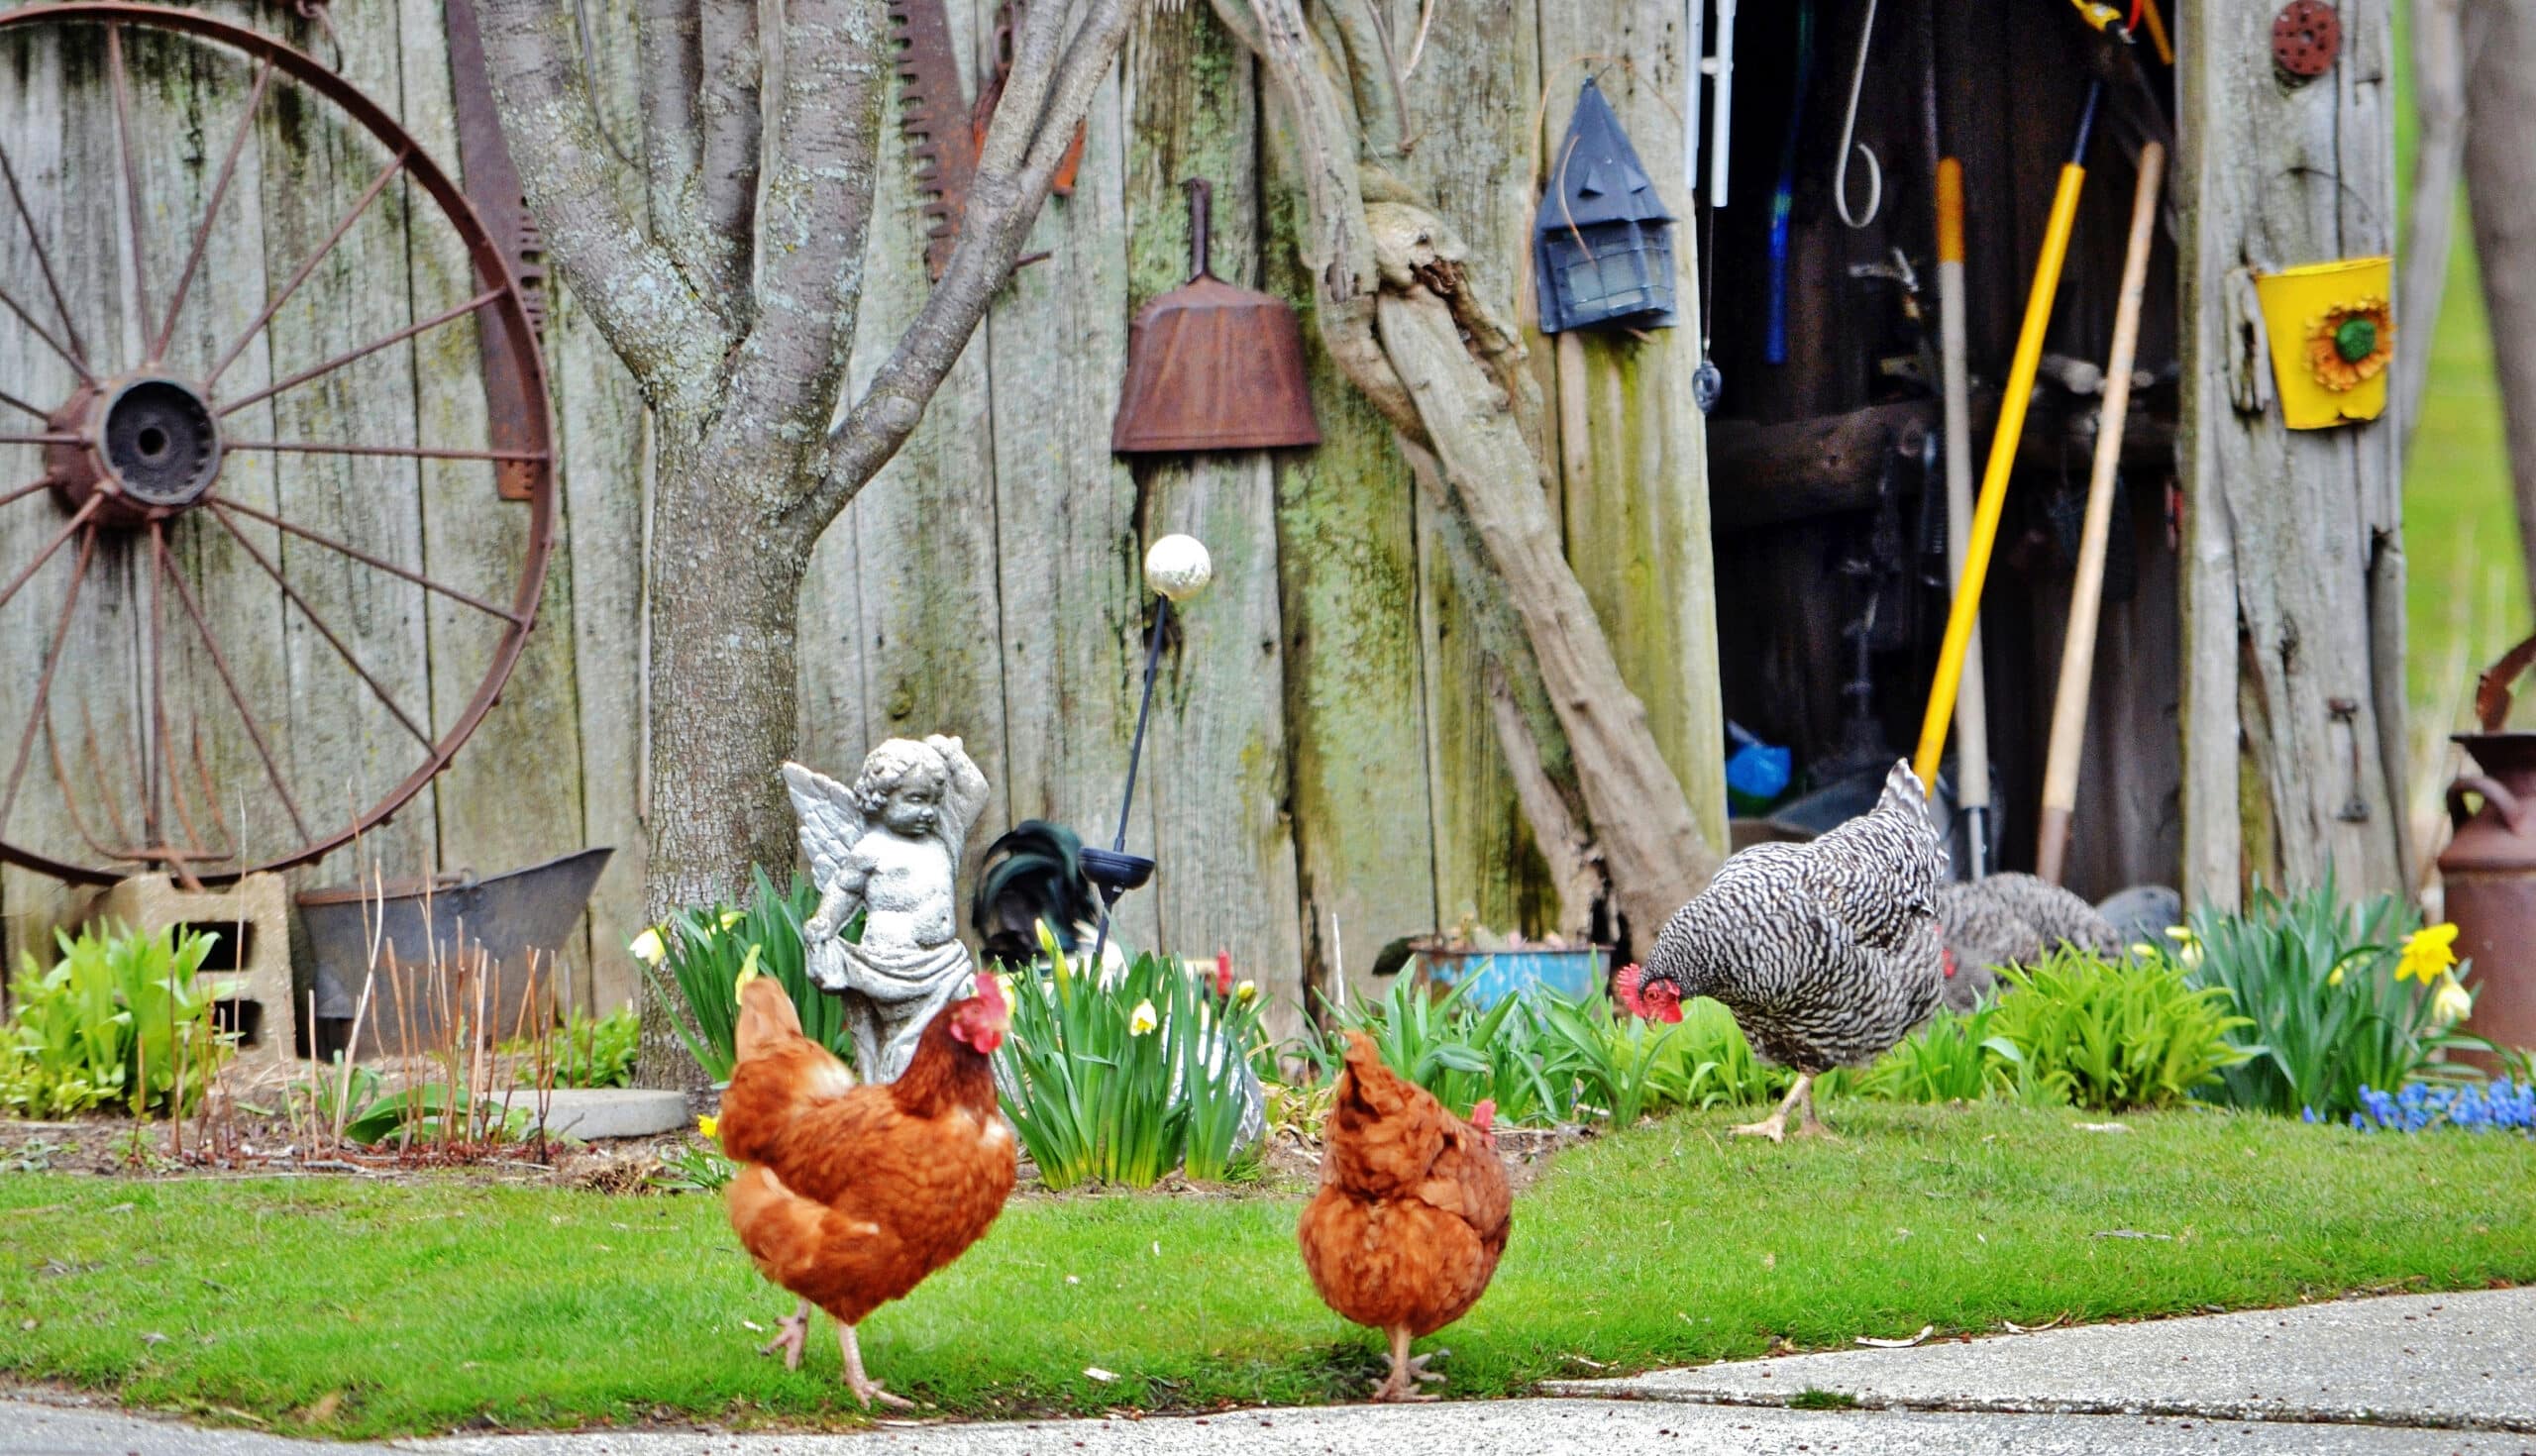 Chickens in front of a garden shed